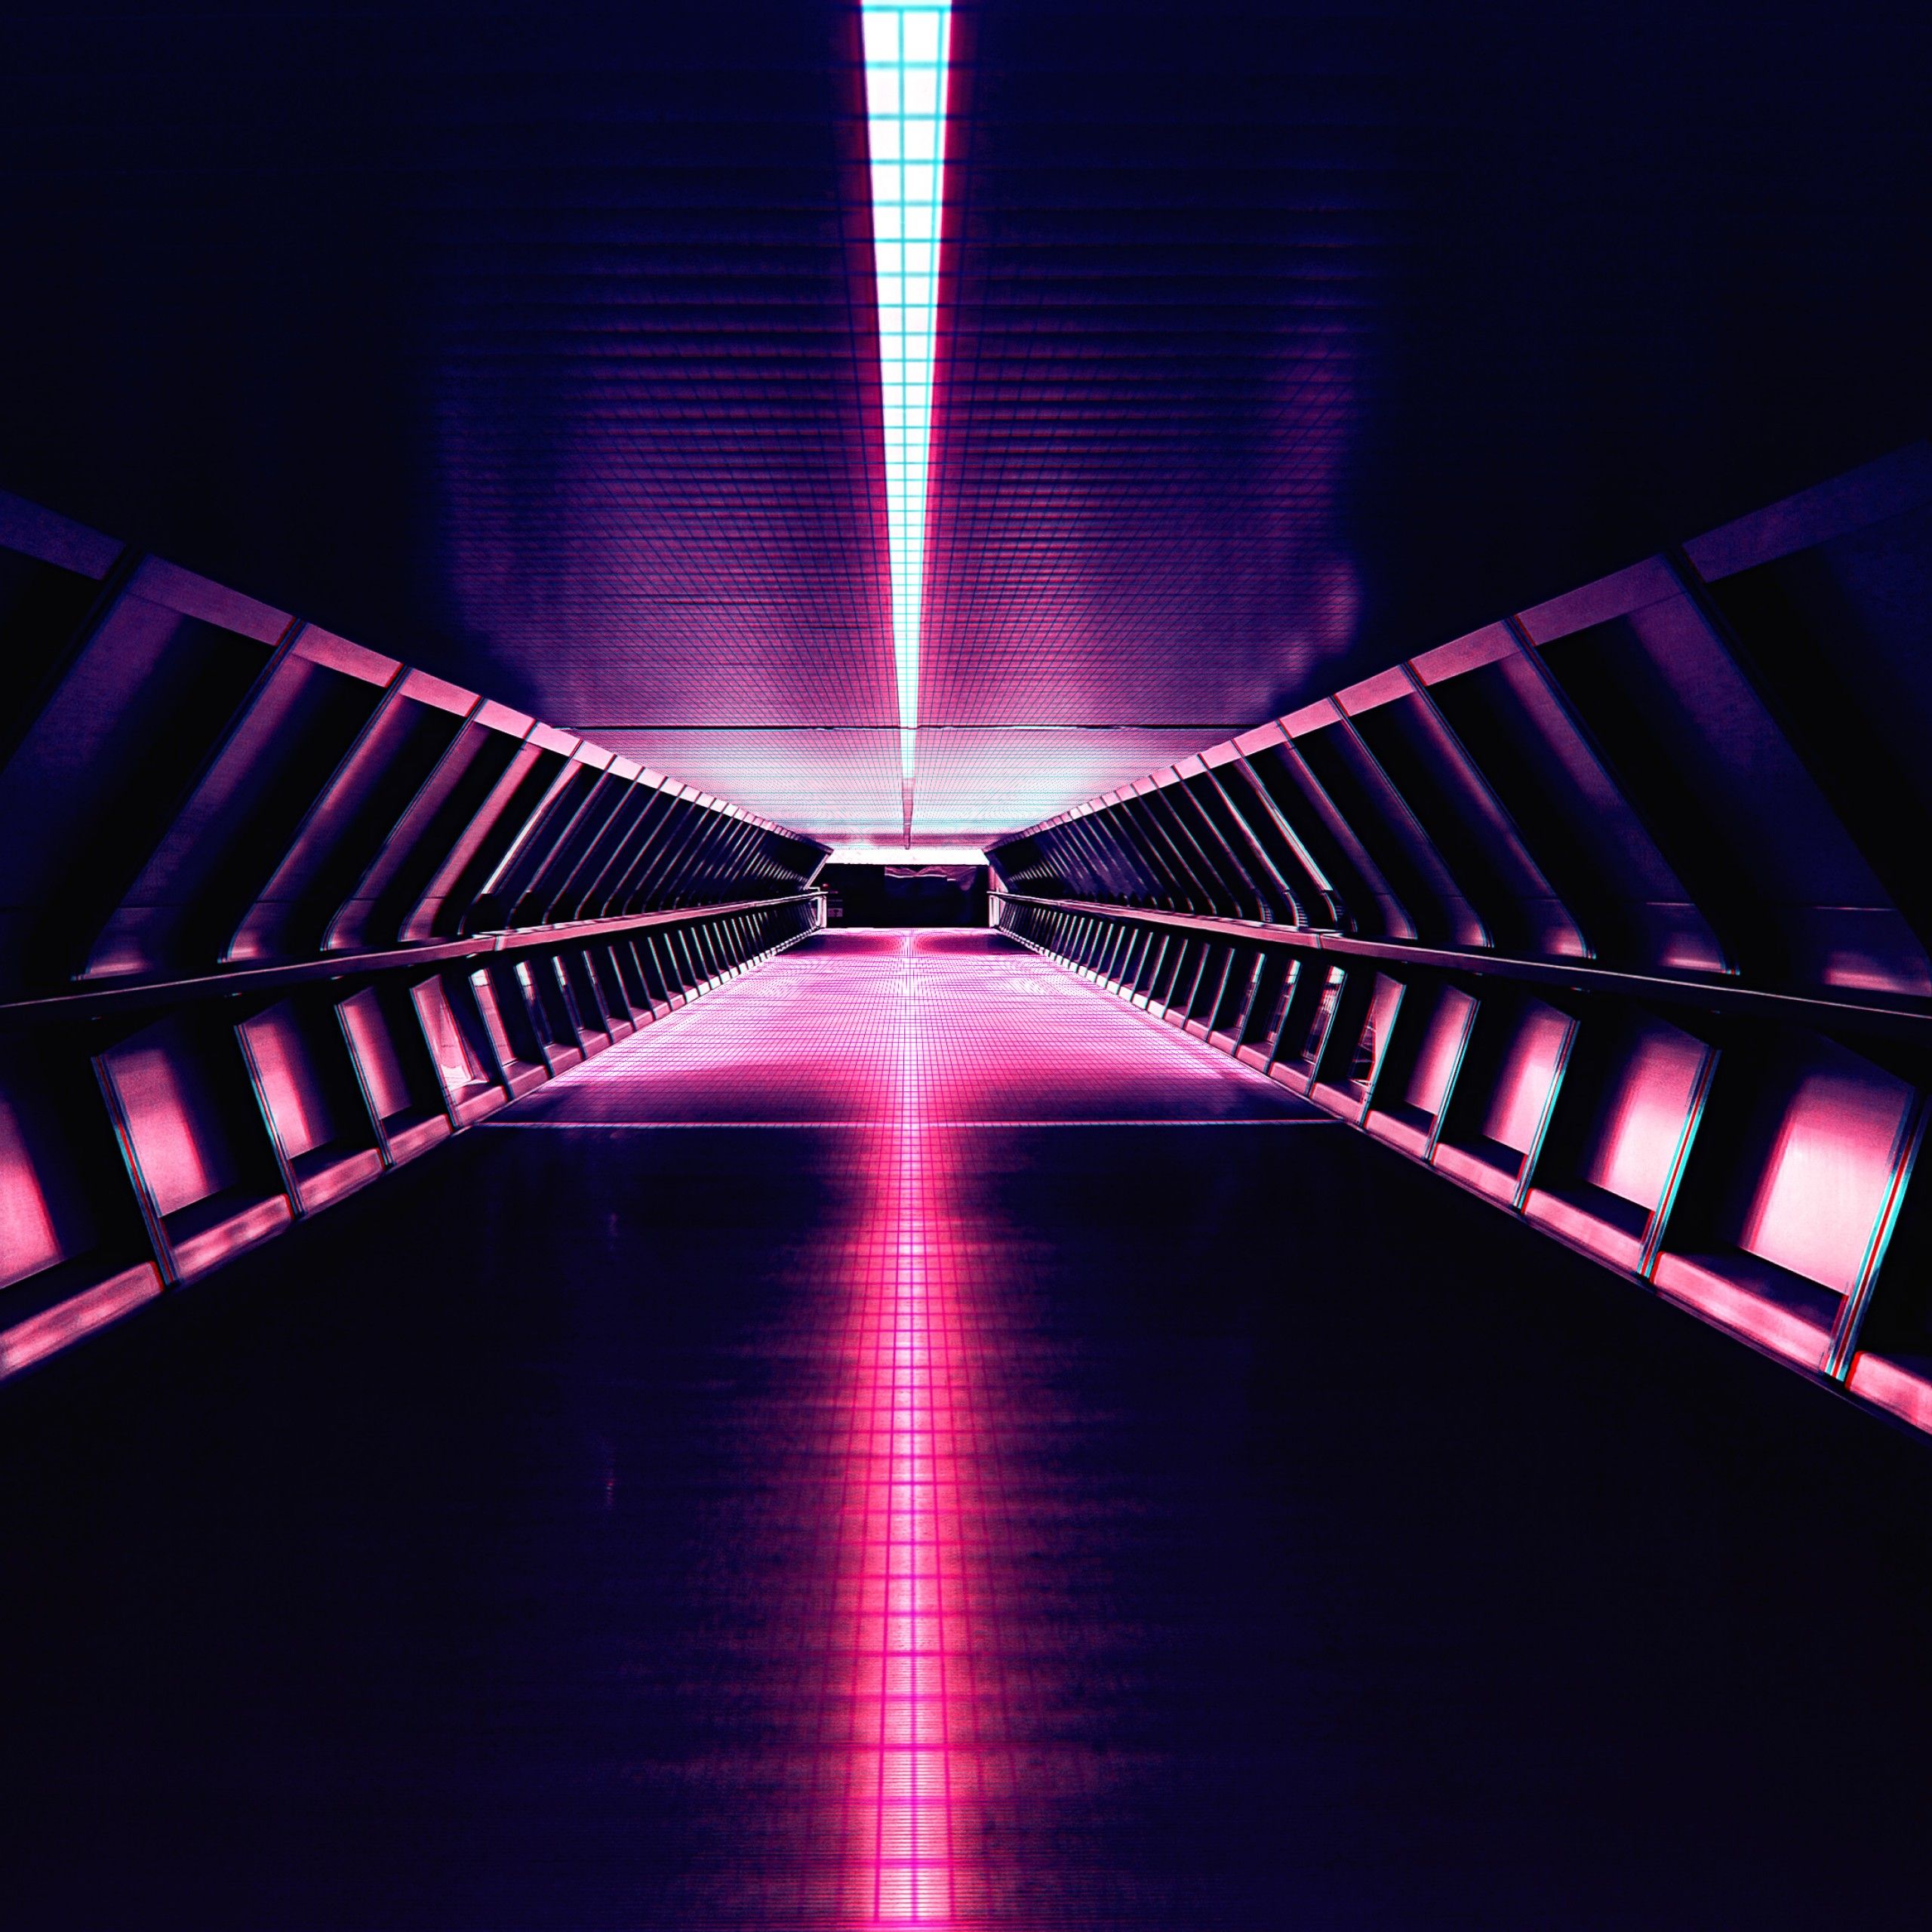 Wallpaper Synthwave, Retro, Electronic music, Neon, Architecture